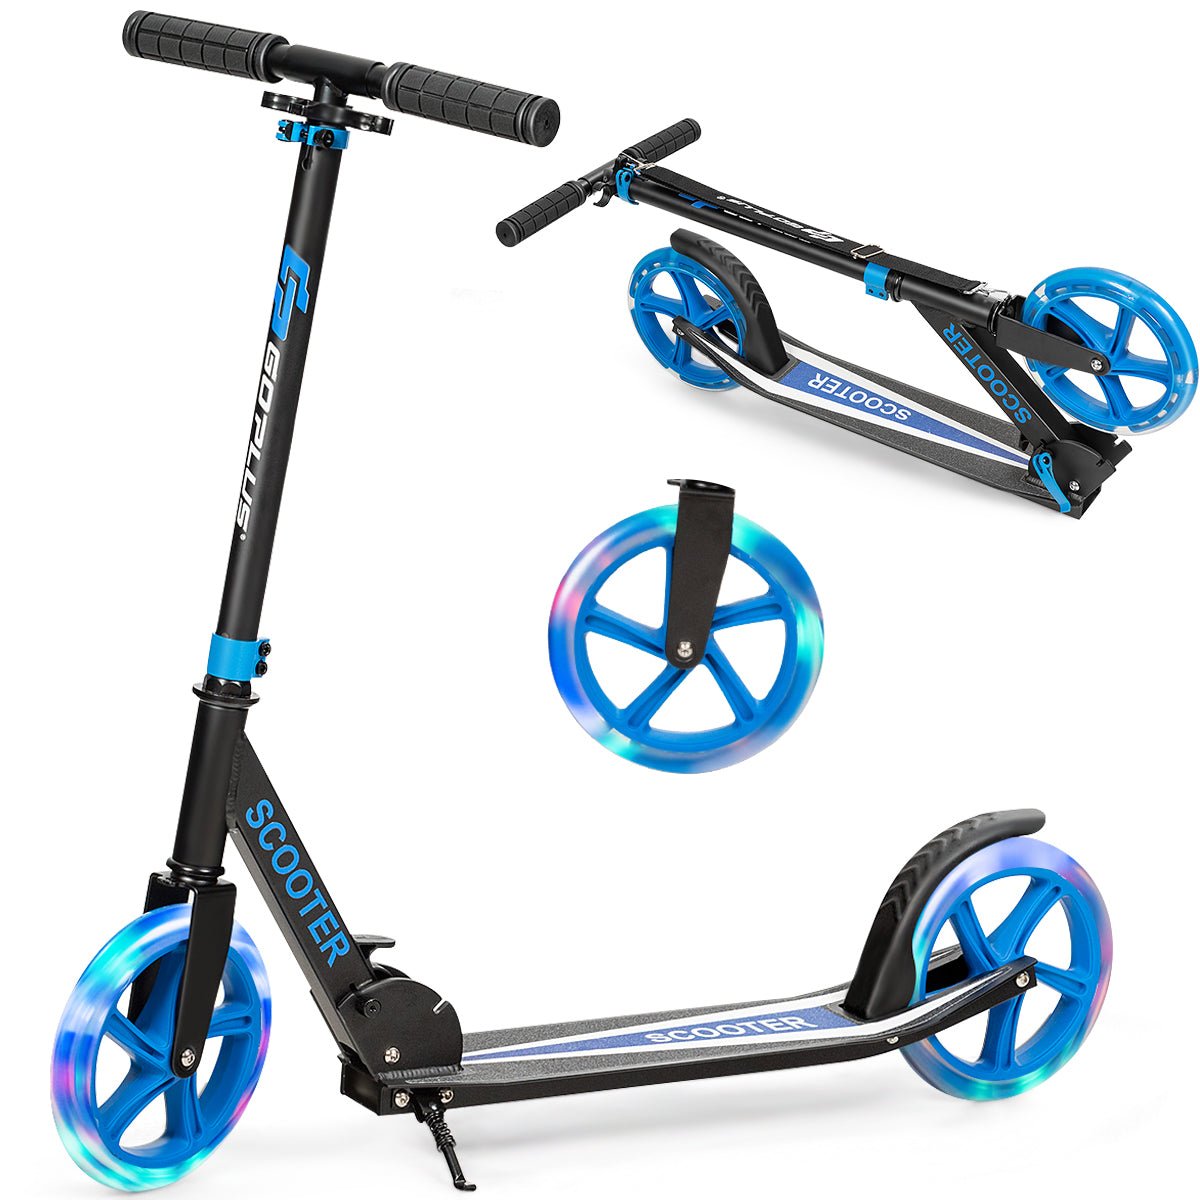 Blue Folding Kick Scooter: Flashing LED Wheels for Exciting Adventures